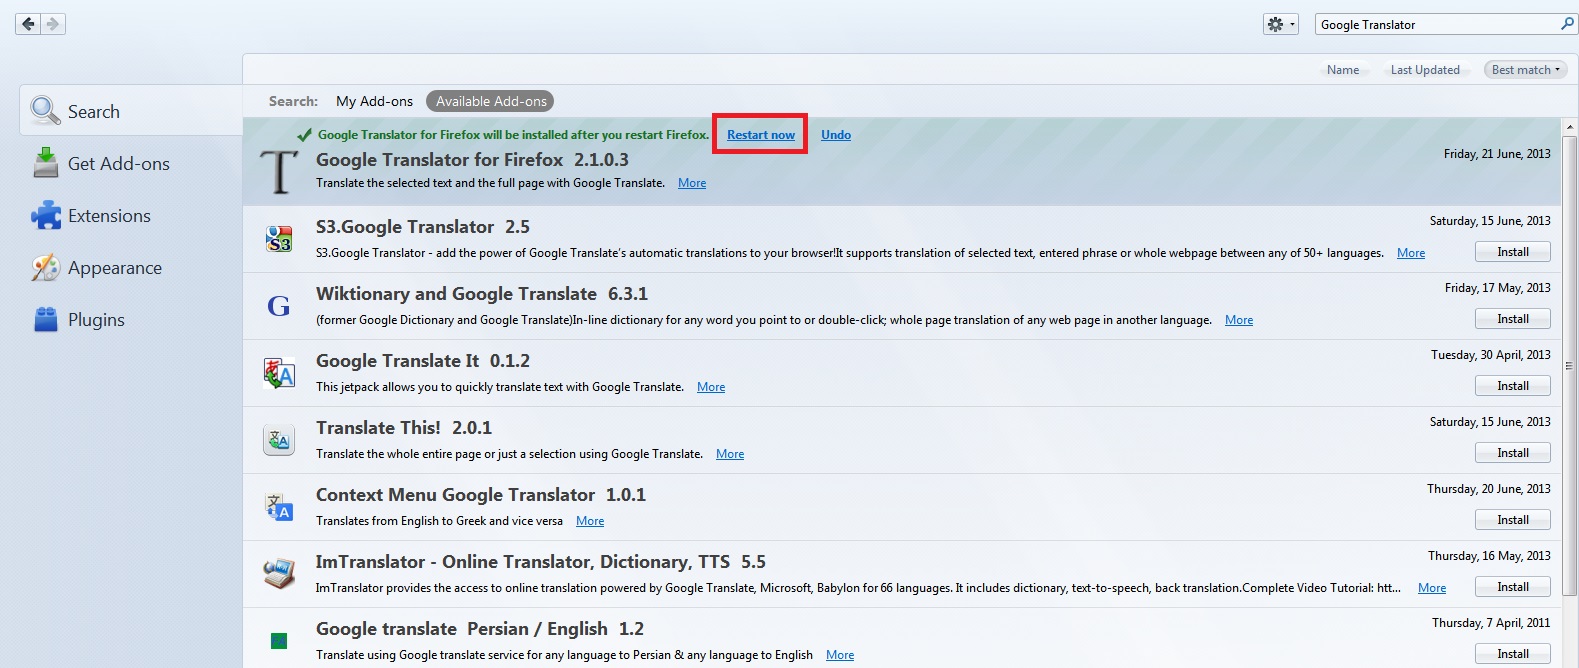 How To Install Add-ons on Mozilla Firefox Browser - Image 4